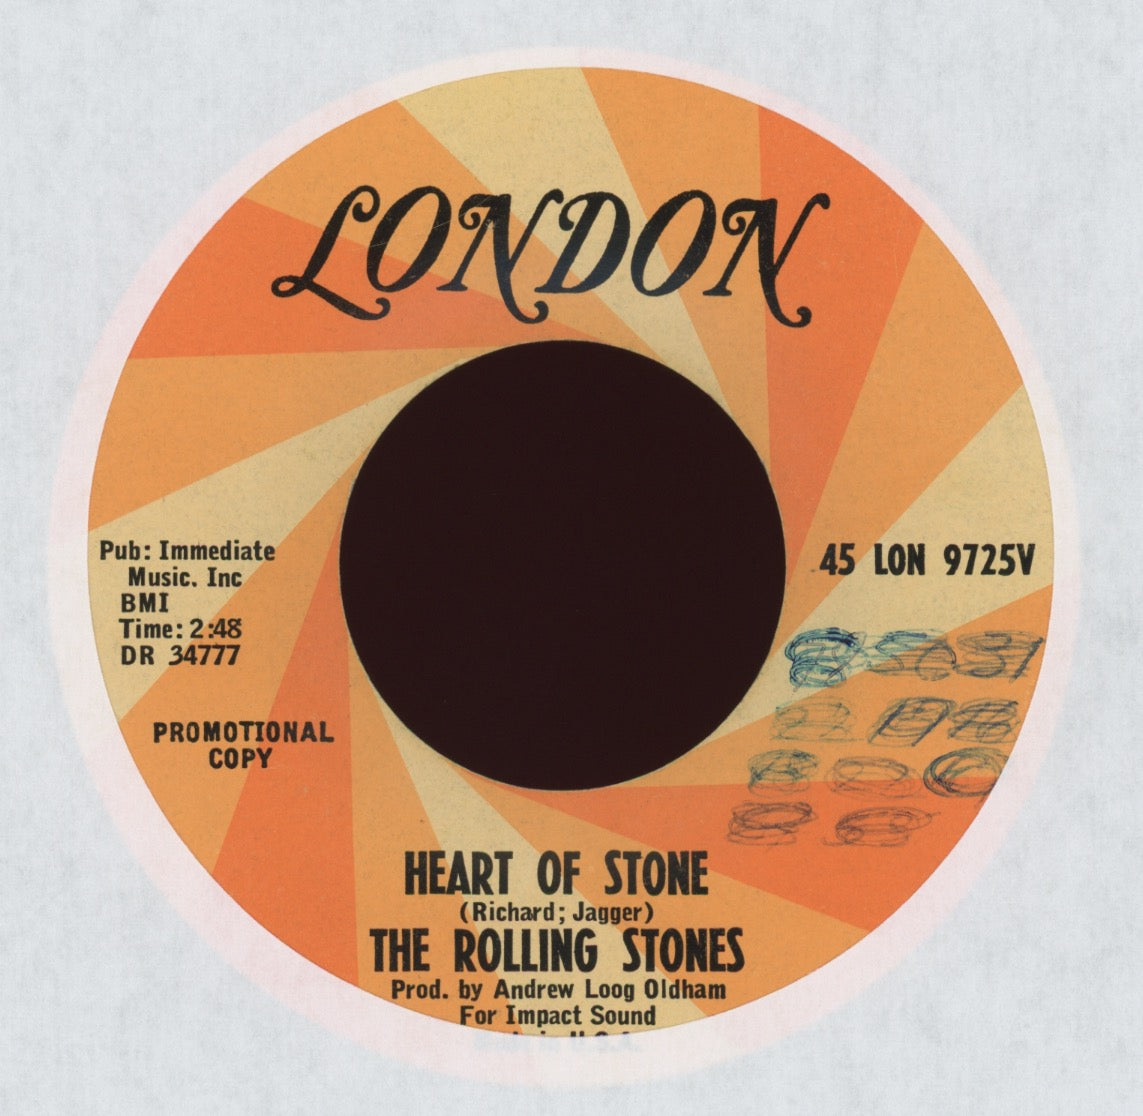 The Rolling Stones - Heart Of Stone on London Promo